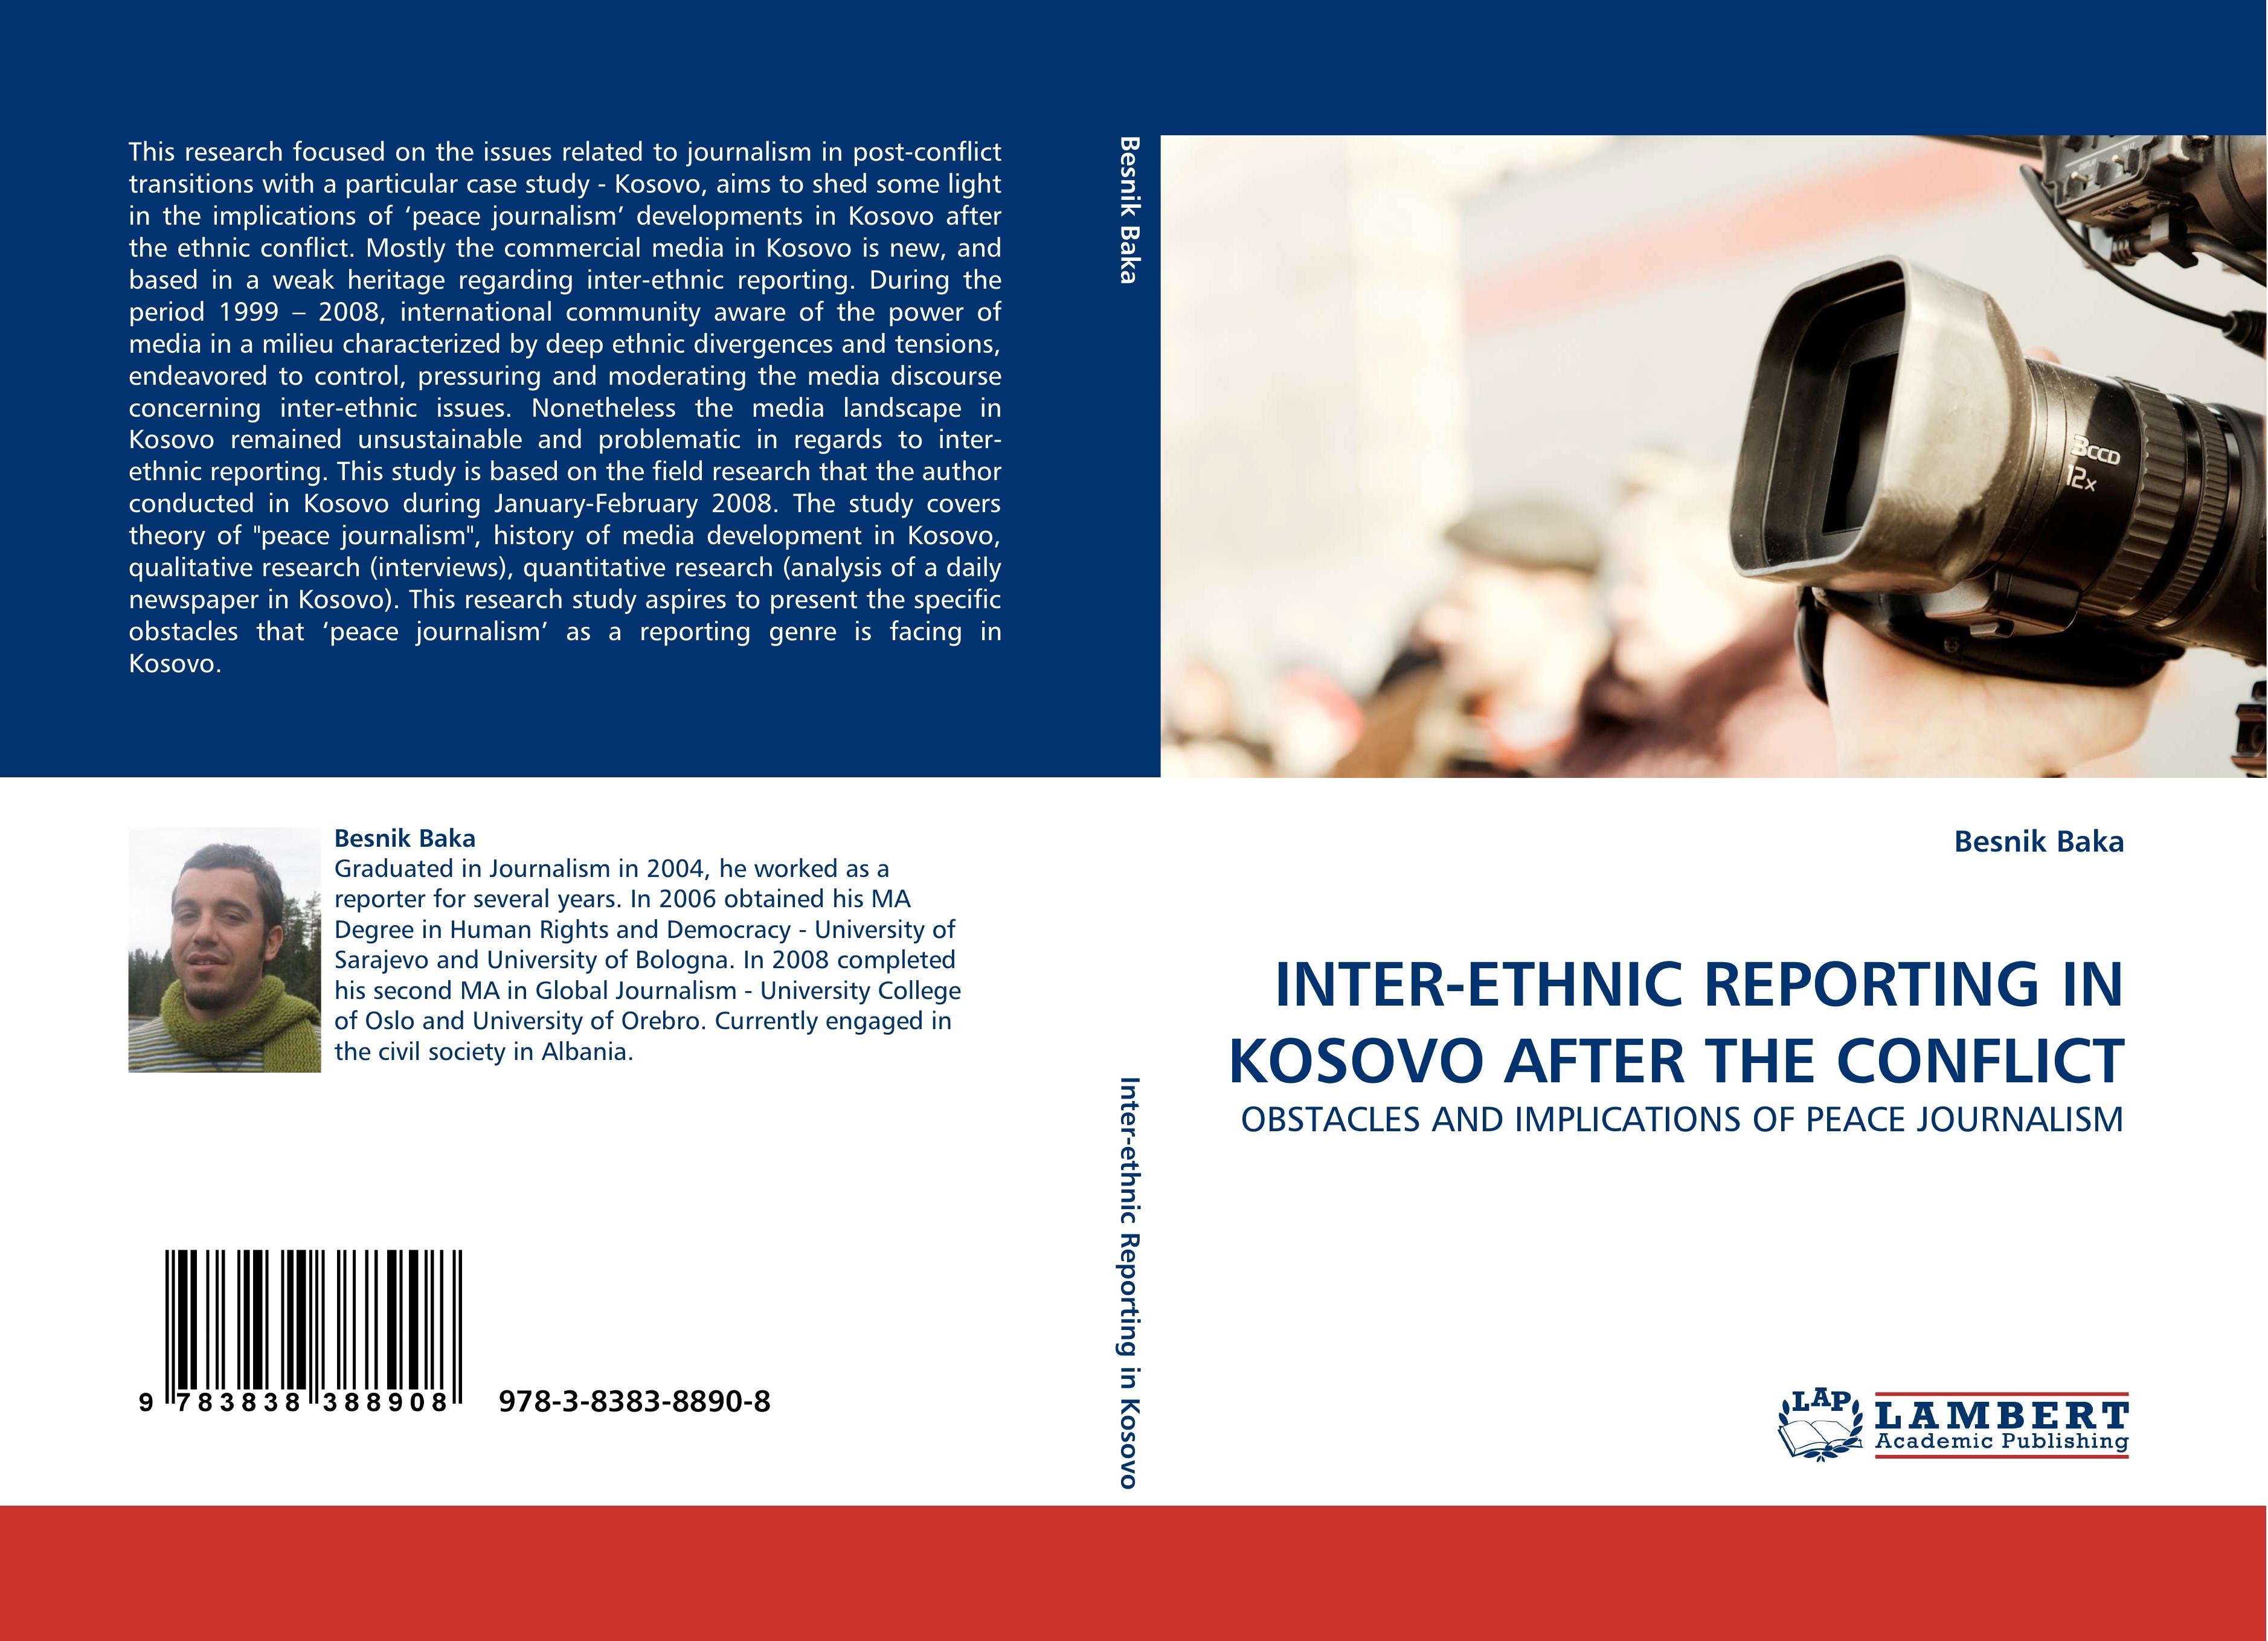 INTER-ETHNIC REPORTING IN KOSOVO AFTER THE CONFLICT / OBSTACLES AND IMPLICATIONS OF PEACE JOURNALISM / Besnik Baka / Taschenbuch / Paperback / 128 S. / Englisch / 2010 / EAN 9783838388908 - Baka, Besnik